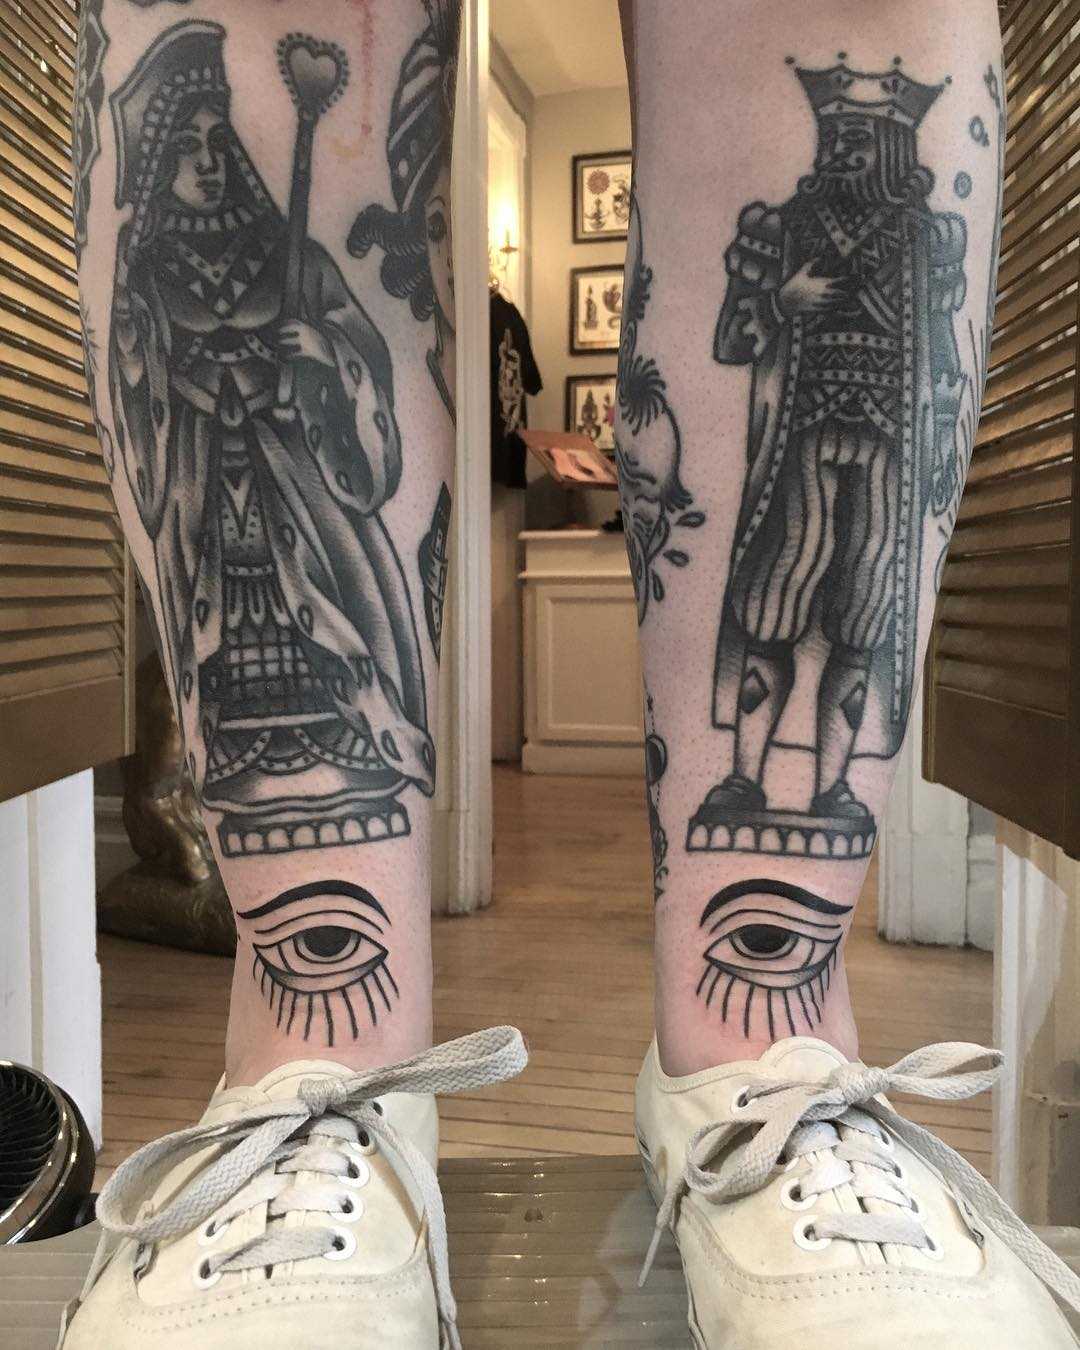 King and queen tattoos on shins